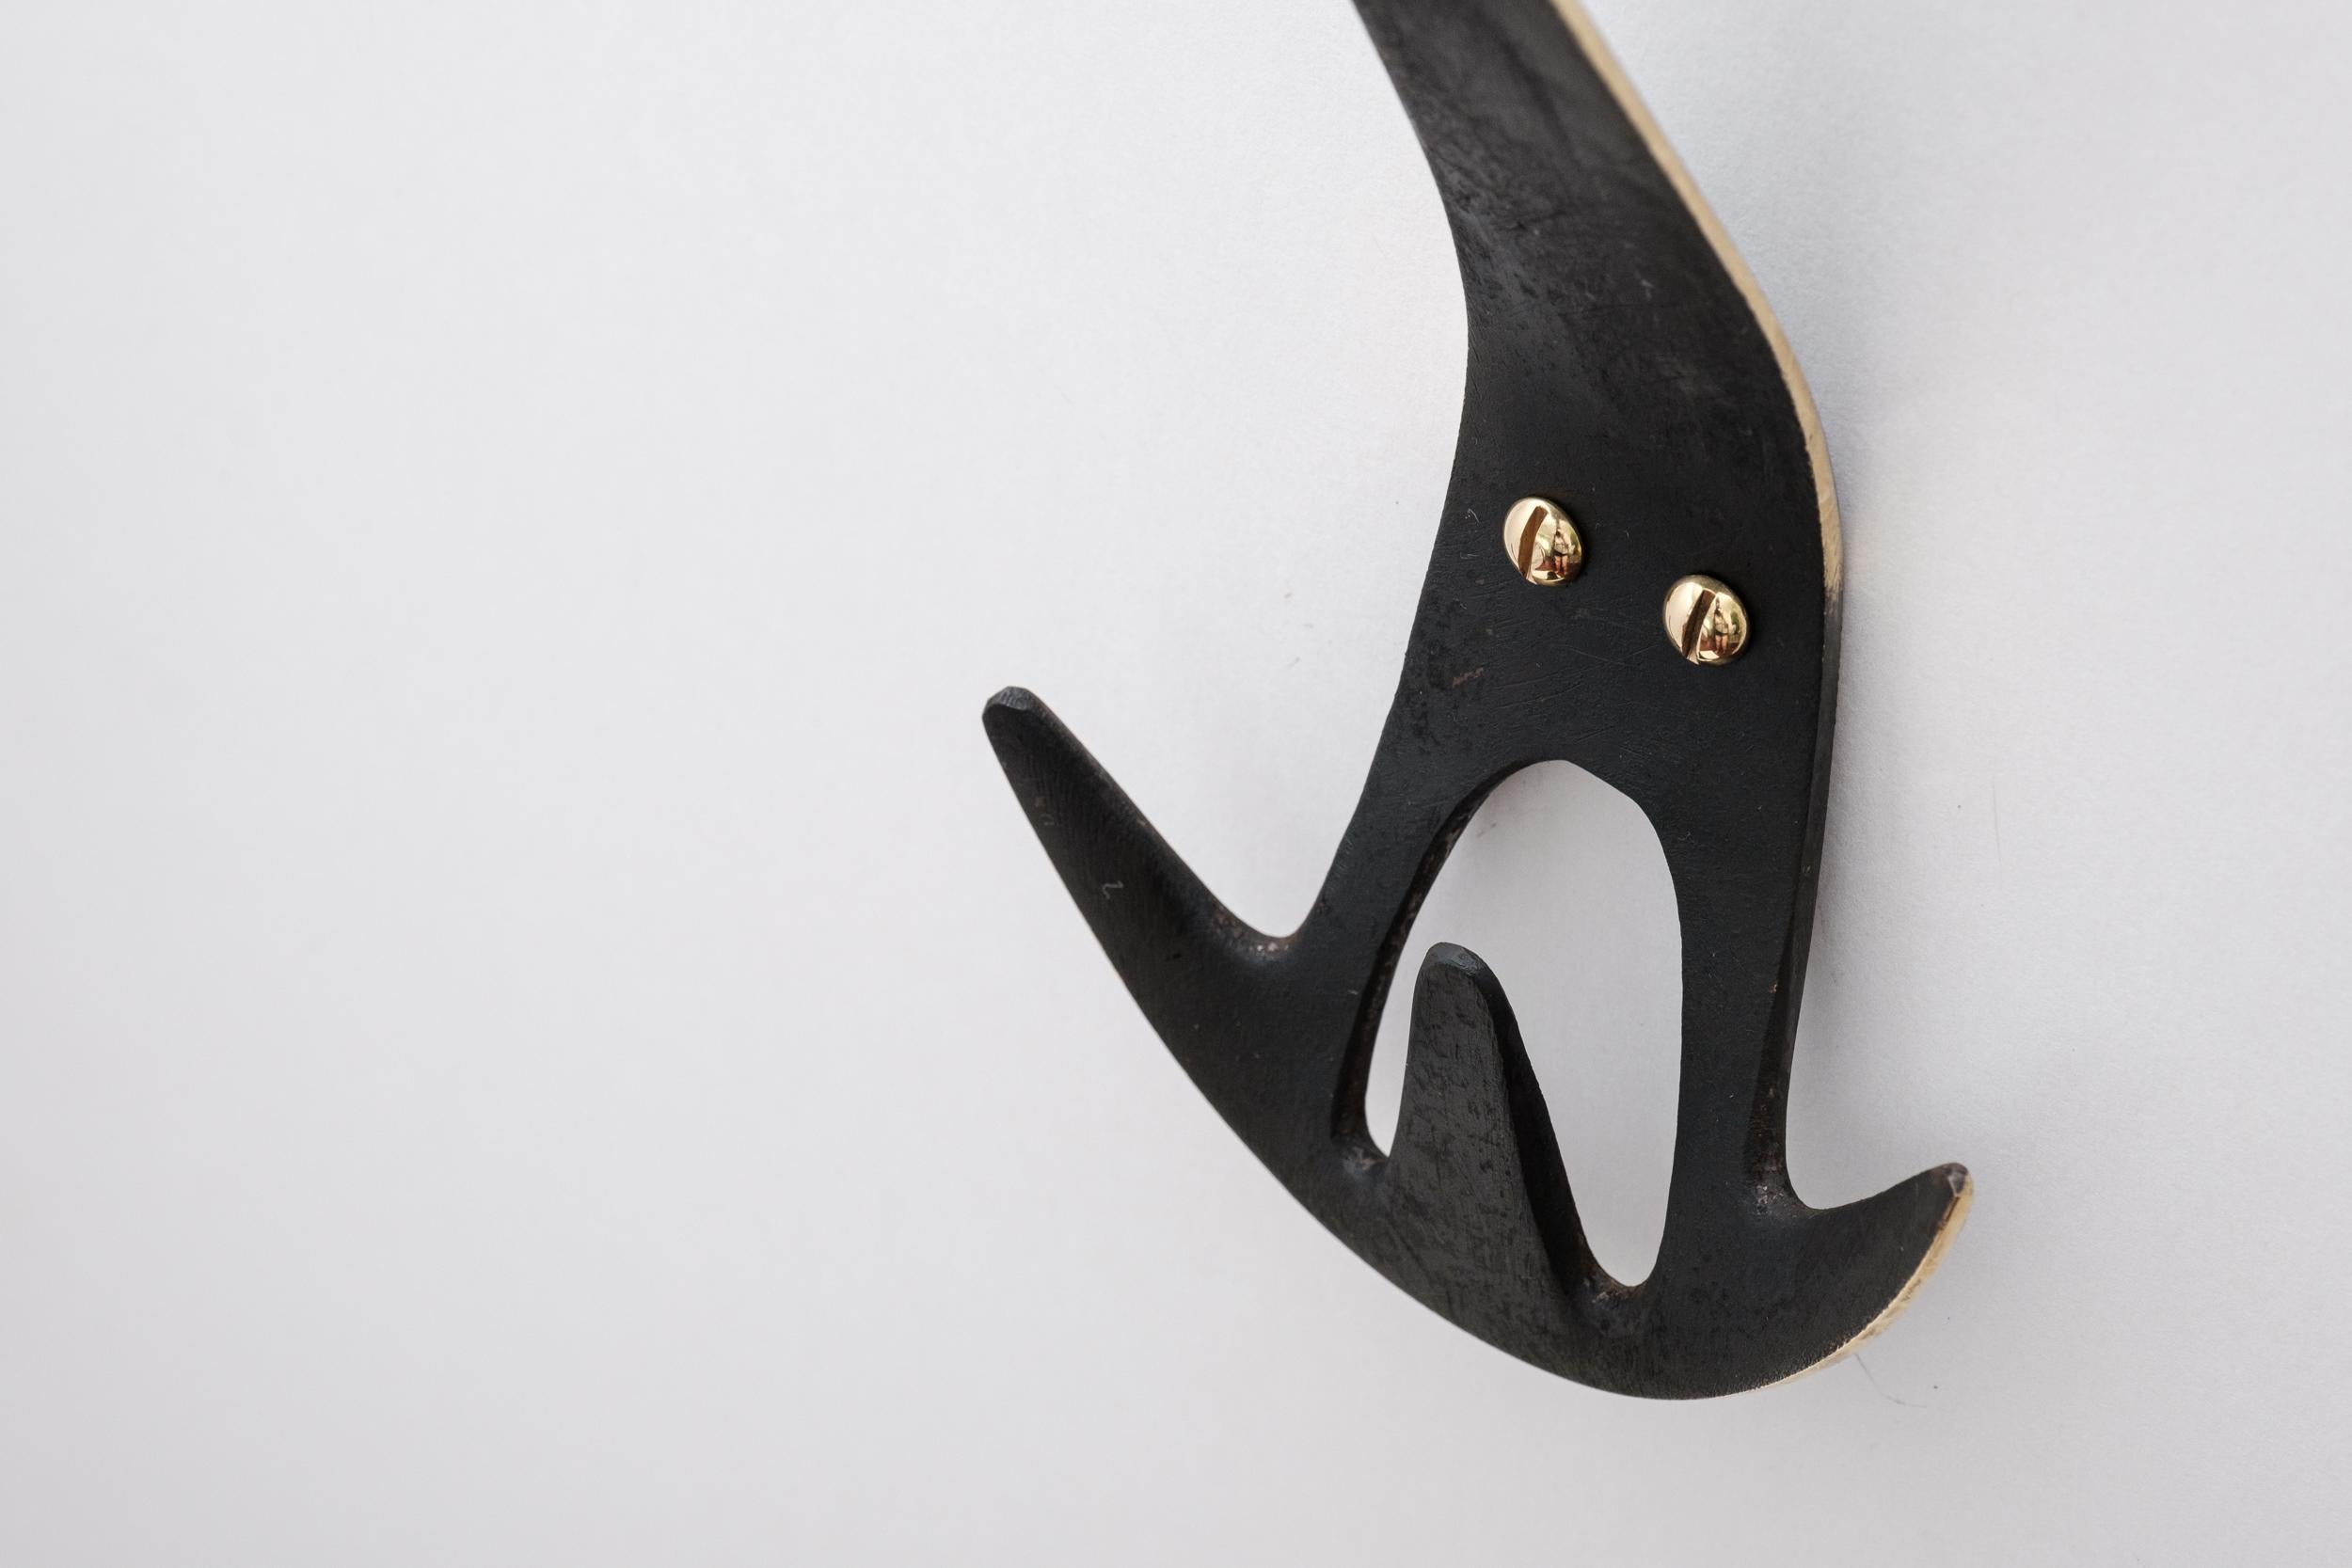 Carl Auböck Model #4903 patinated brass hook. Designed in the 1950s, this versatile and Minimalist Viennese hook is executed in patinated brass by Werkstätte Carl Auböck, Austria. 

Produced by Carl Auböck IV in the original Auböck workshop in the